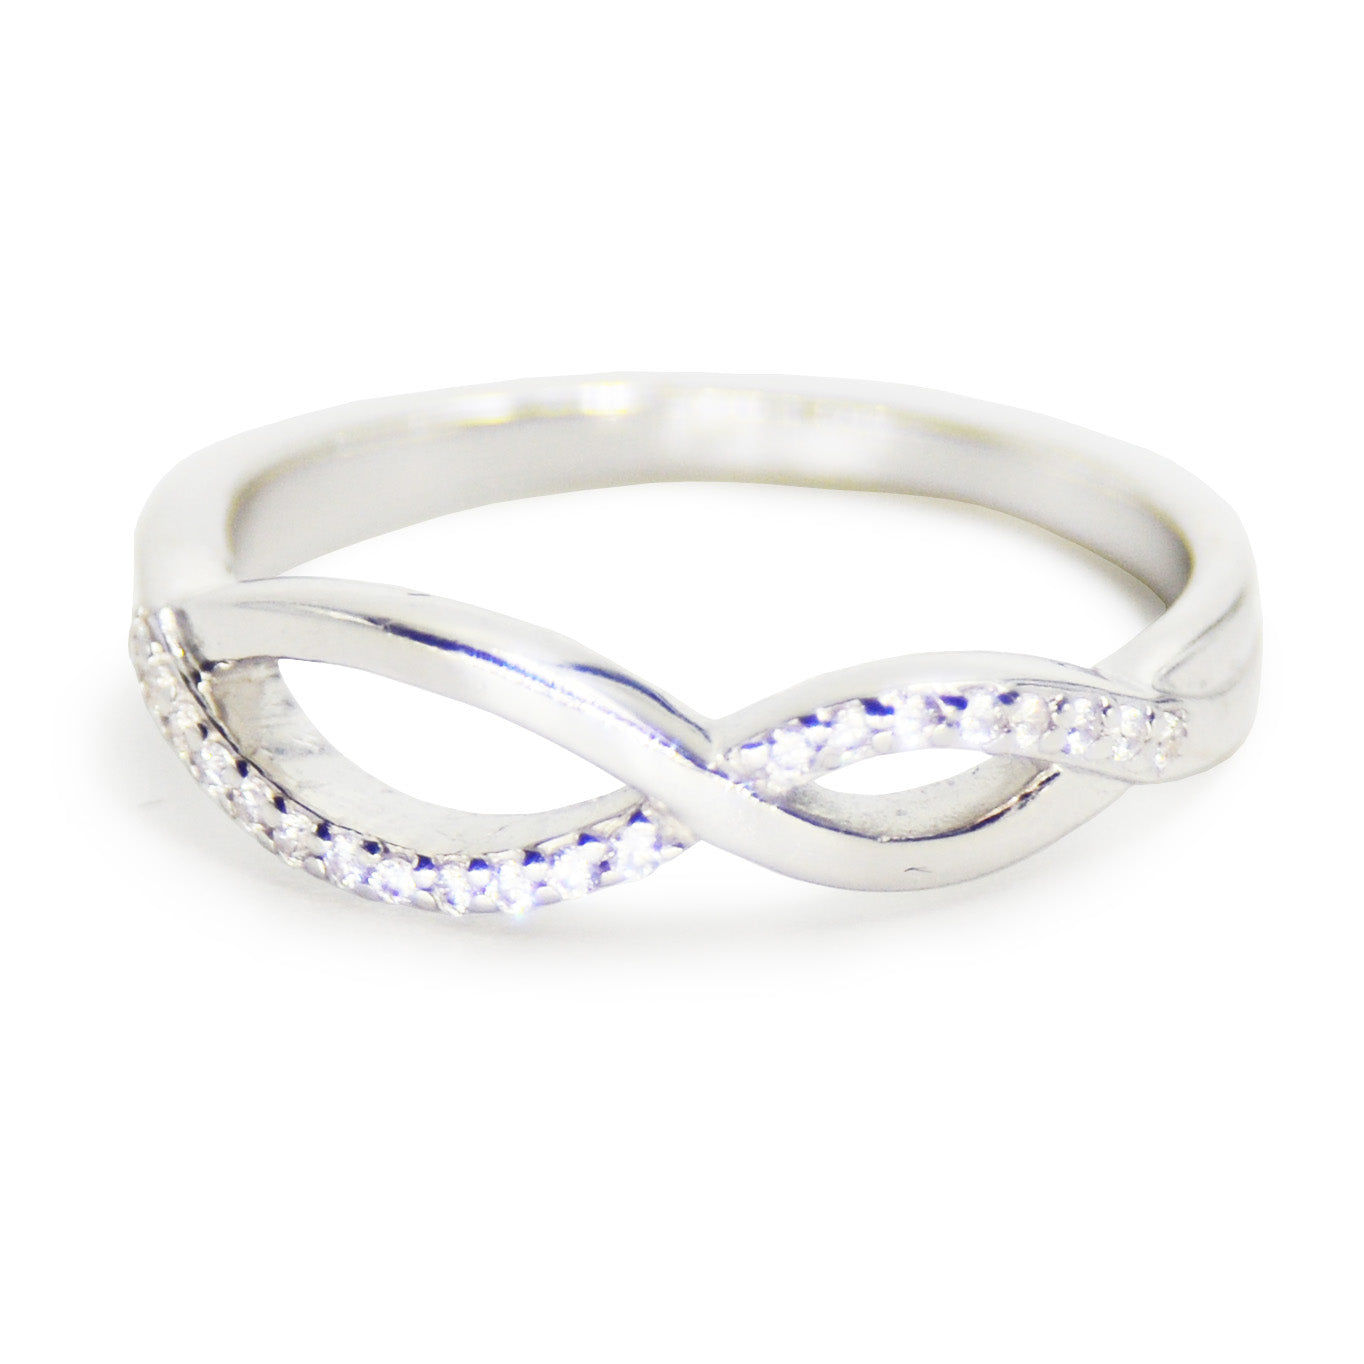 White Cubic Zirconia Infinity Ring in Sterling Silver with Platinum Plating  - 7153394 - TJC